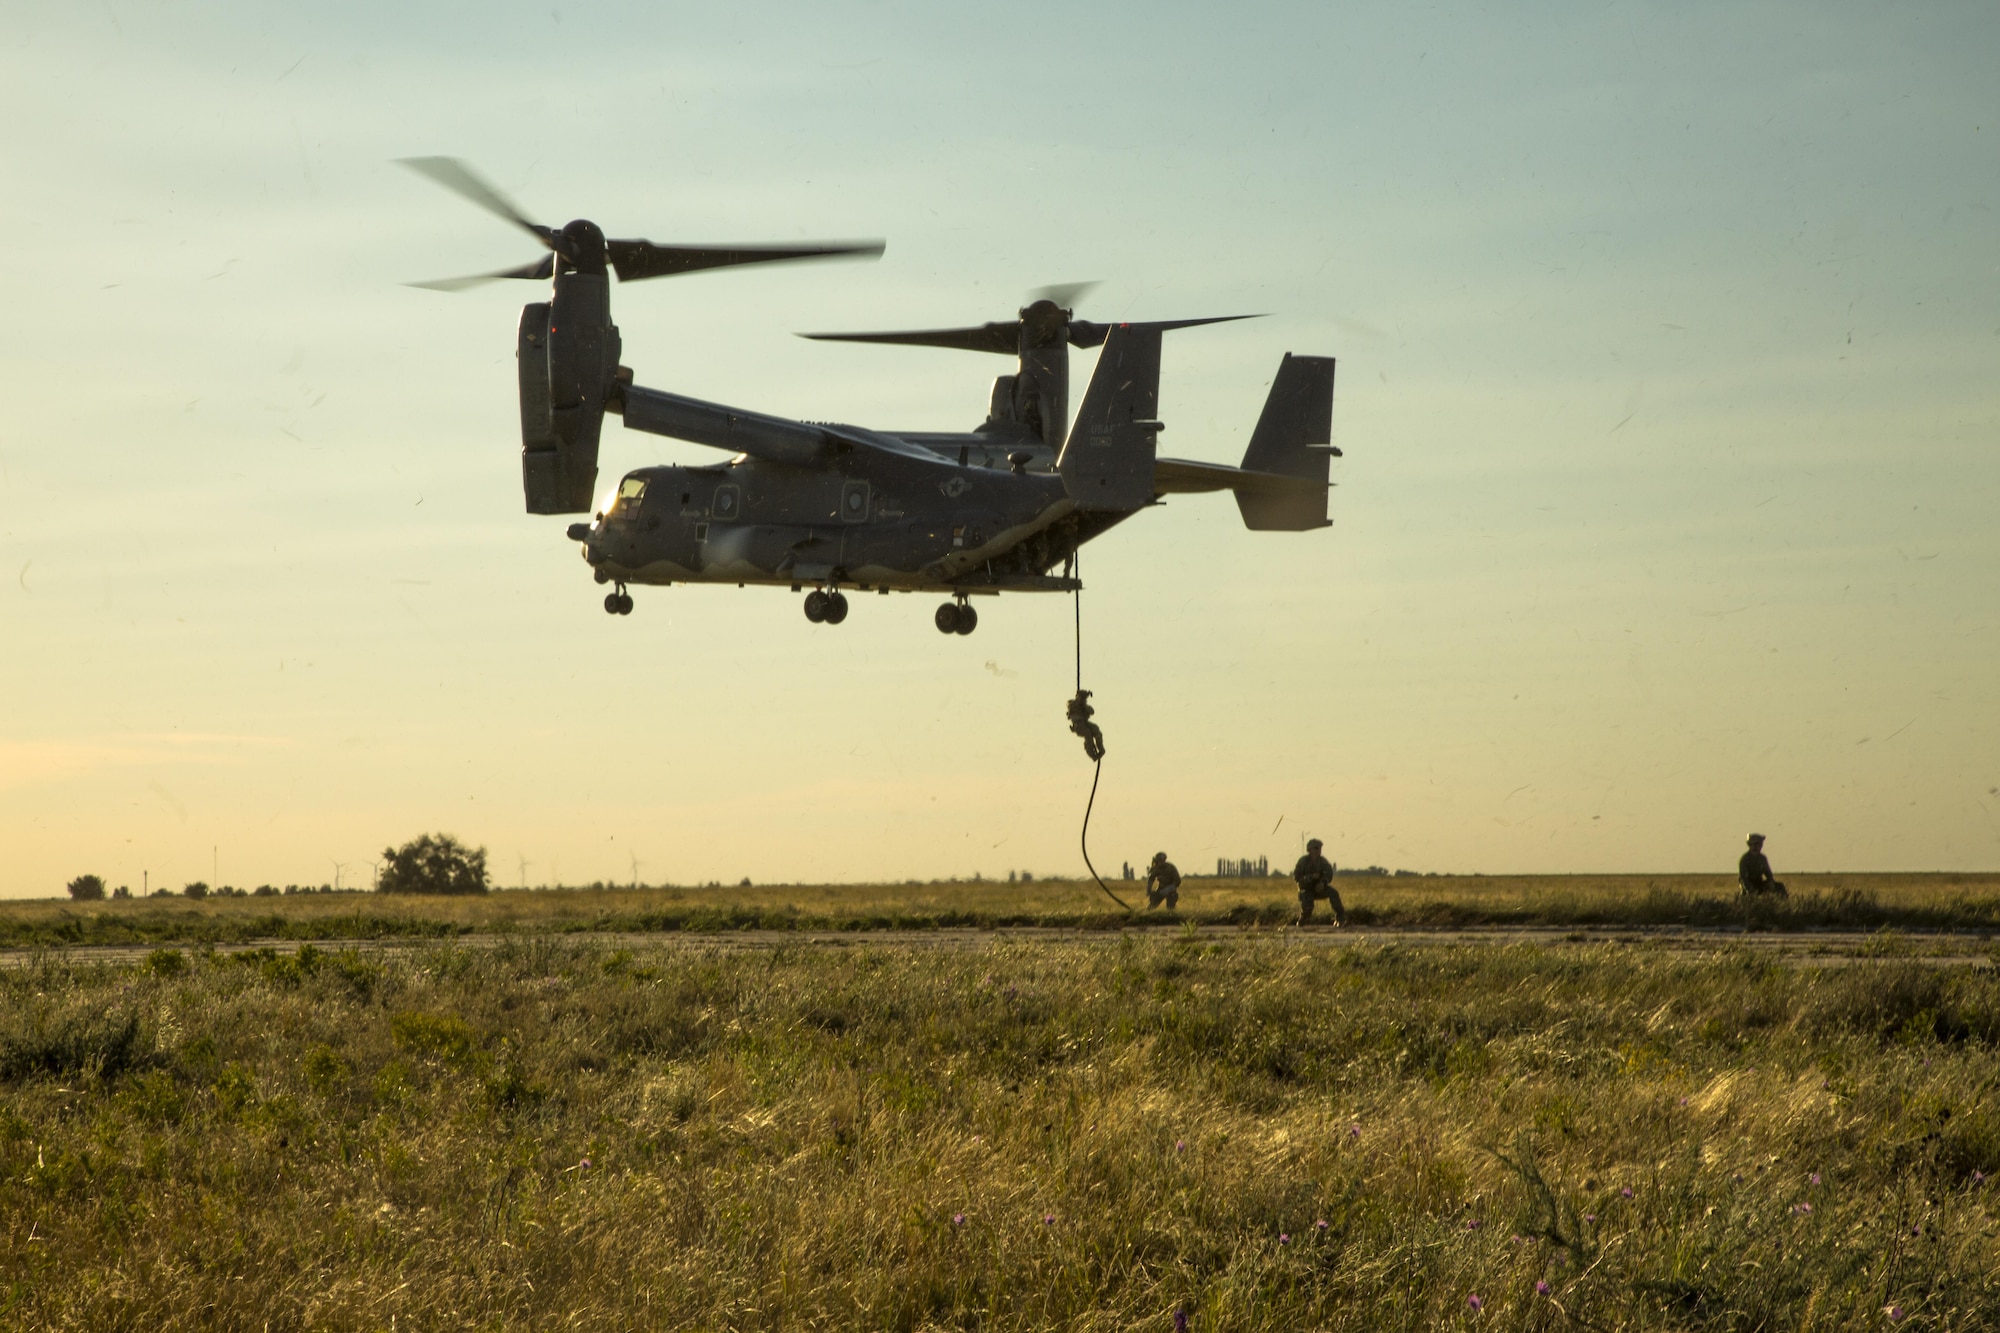 U.S. Special Operations Forces fast rope from a hovering CV-22 Osprey at Mykolaiv, Ukraine, July 14, 2017 during exercise Sea Breeze 17.  Sea Breeze is a U.S. and Ukraine co-hosted multinational maritime exercise held in the Black Sea and is designed to enhance interoperability of participating nations and strengthen maritime security within the region.